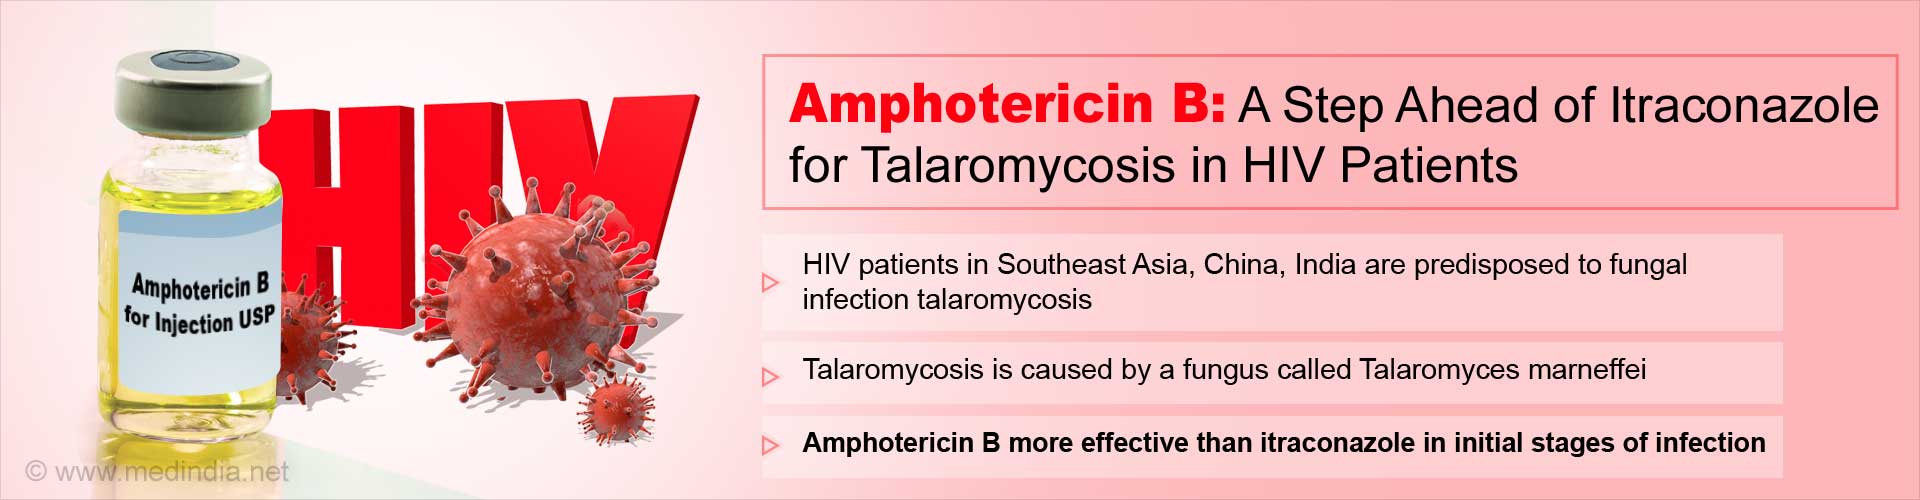 Amphotericin B: A Step Ahead of itraconazole for talaromycosis in HIV patients
- HIV patients in Southeast Asia, China, India are predisposed to fungal infection talaromycosis
- Talaromycosis is caused by a fungus called Talaromyces marneffei
-  Amphotericin B more effective than itraconazole in initial stages of infection